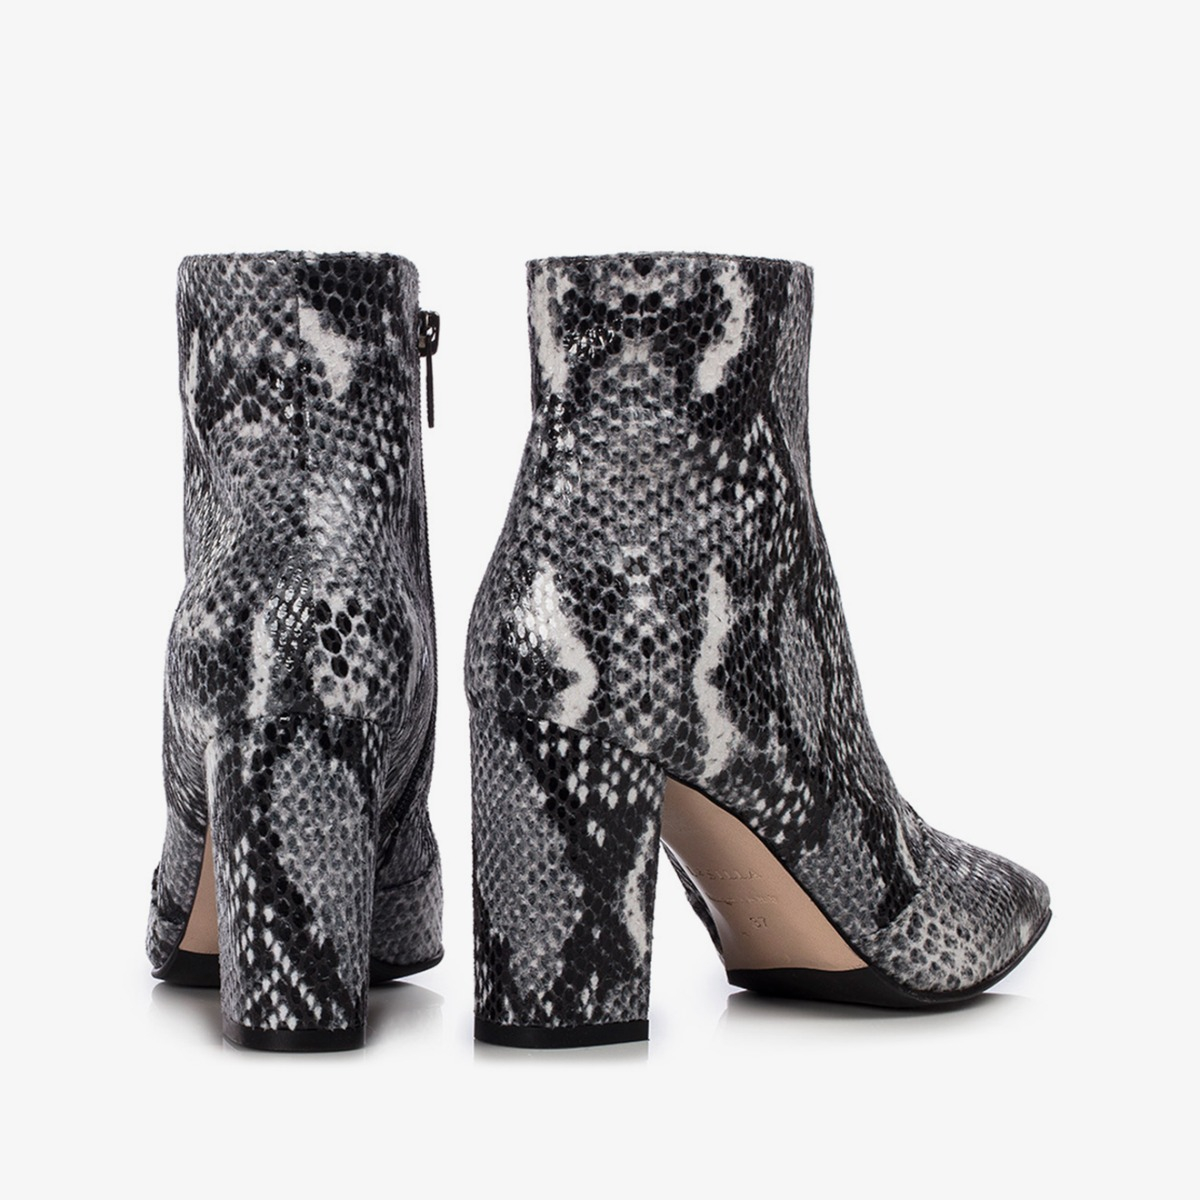 MEGAN ANKLE BOOT 80 mm - Le Silla official outlet